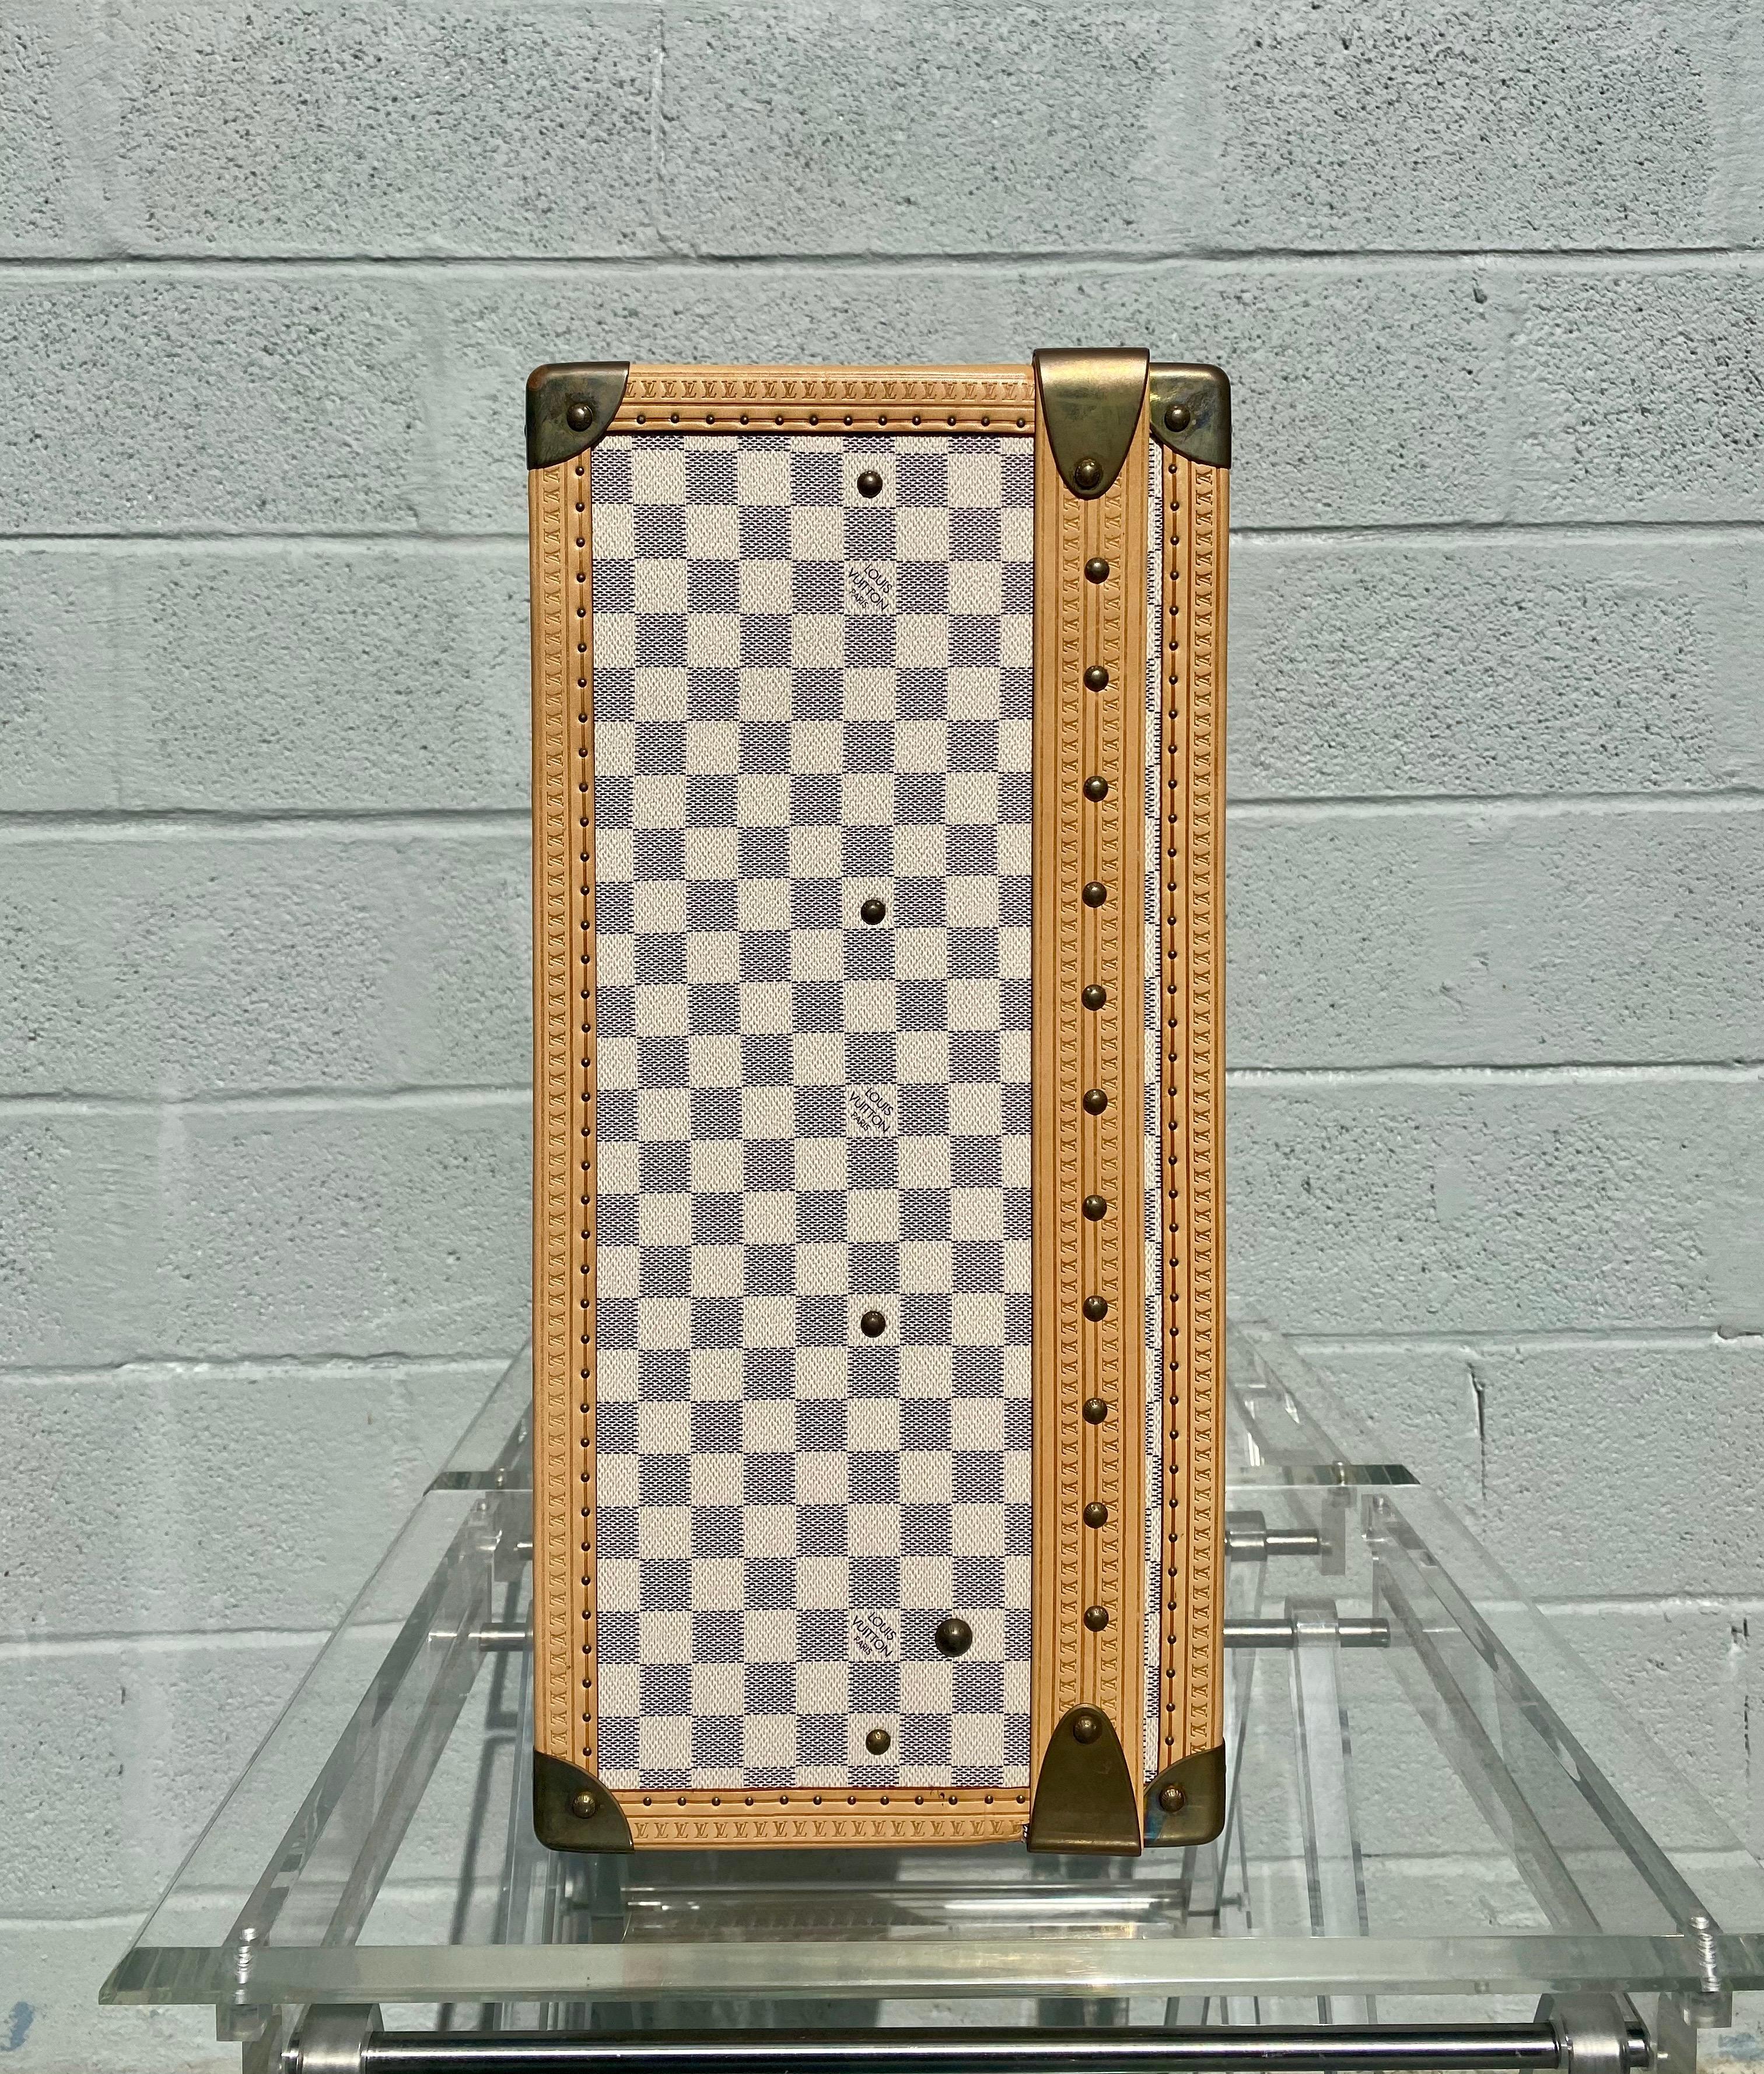 New Louis Vuitton Limited Edition Alzer Damier Azur Rare Travel Trunk 75cm In New Condition For Sale In Fort Lauderdale, FL